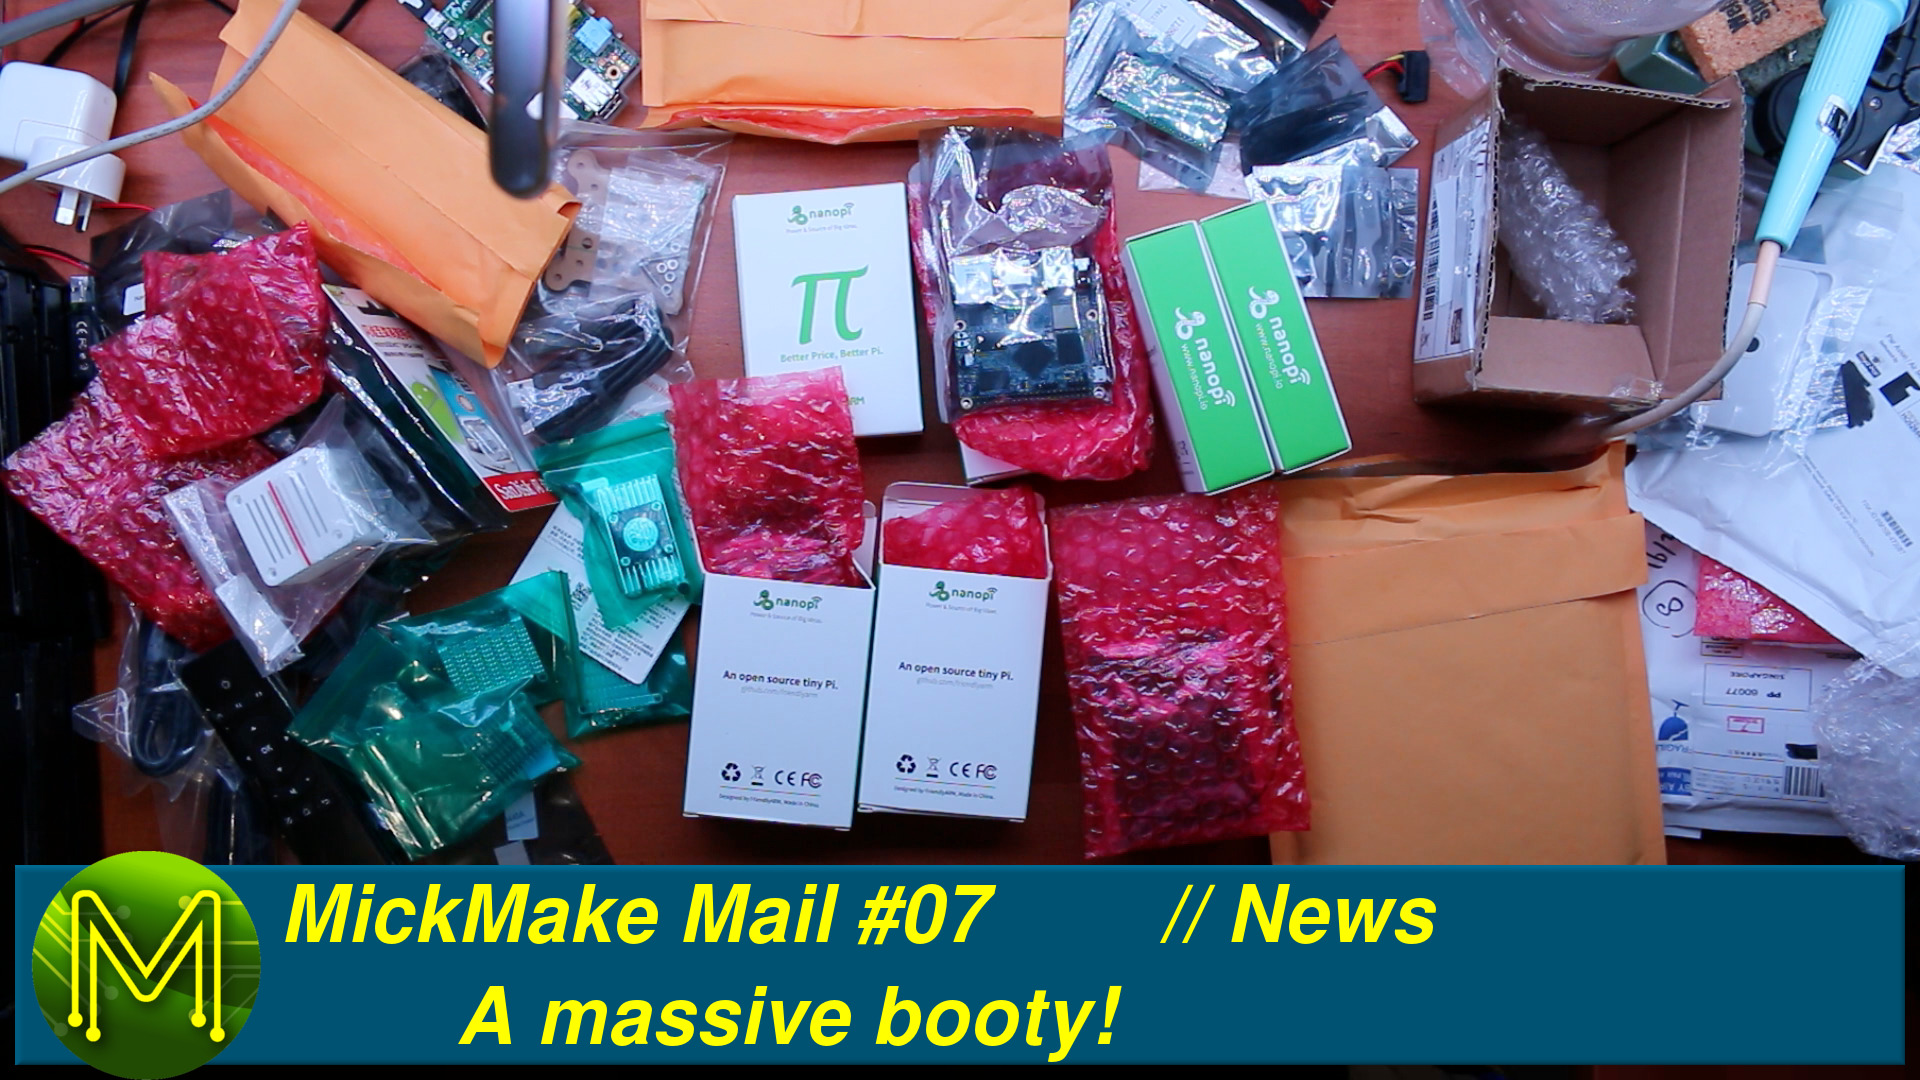 MickMake Mail #07: A massive booty! // News